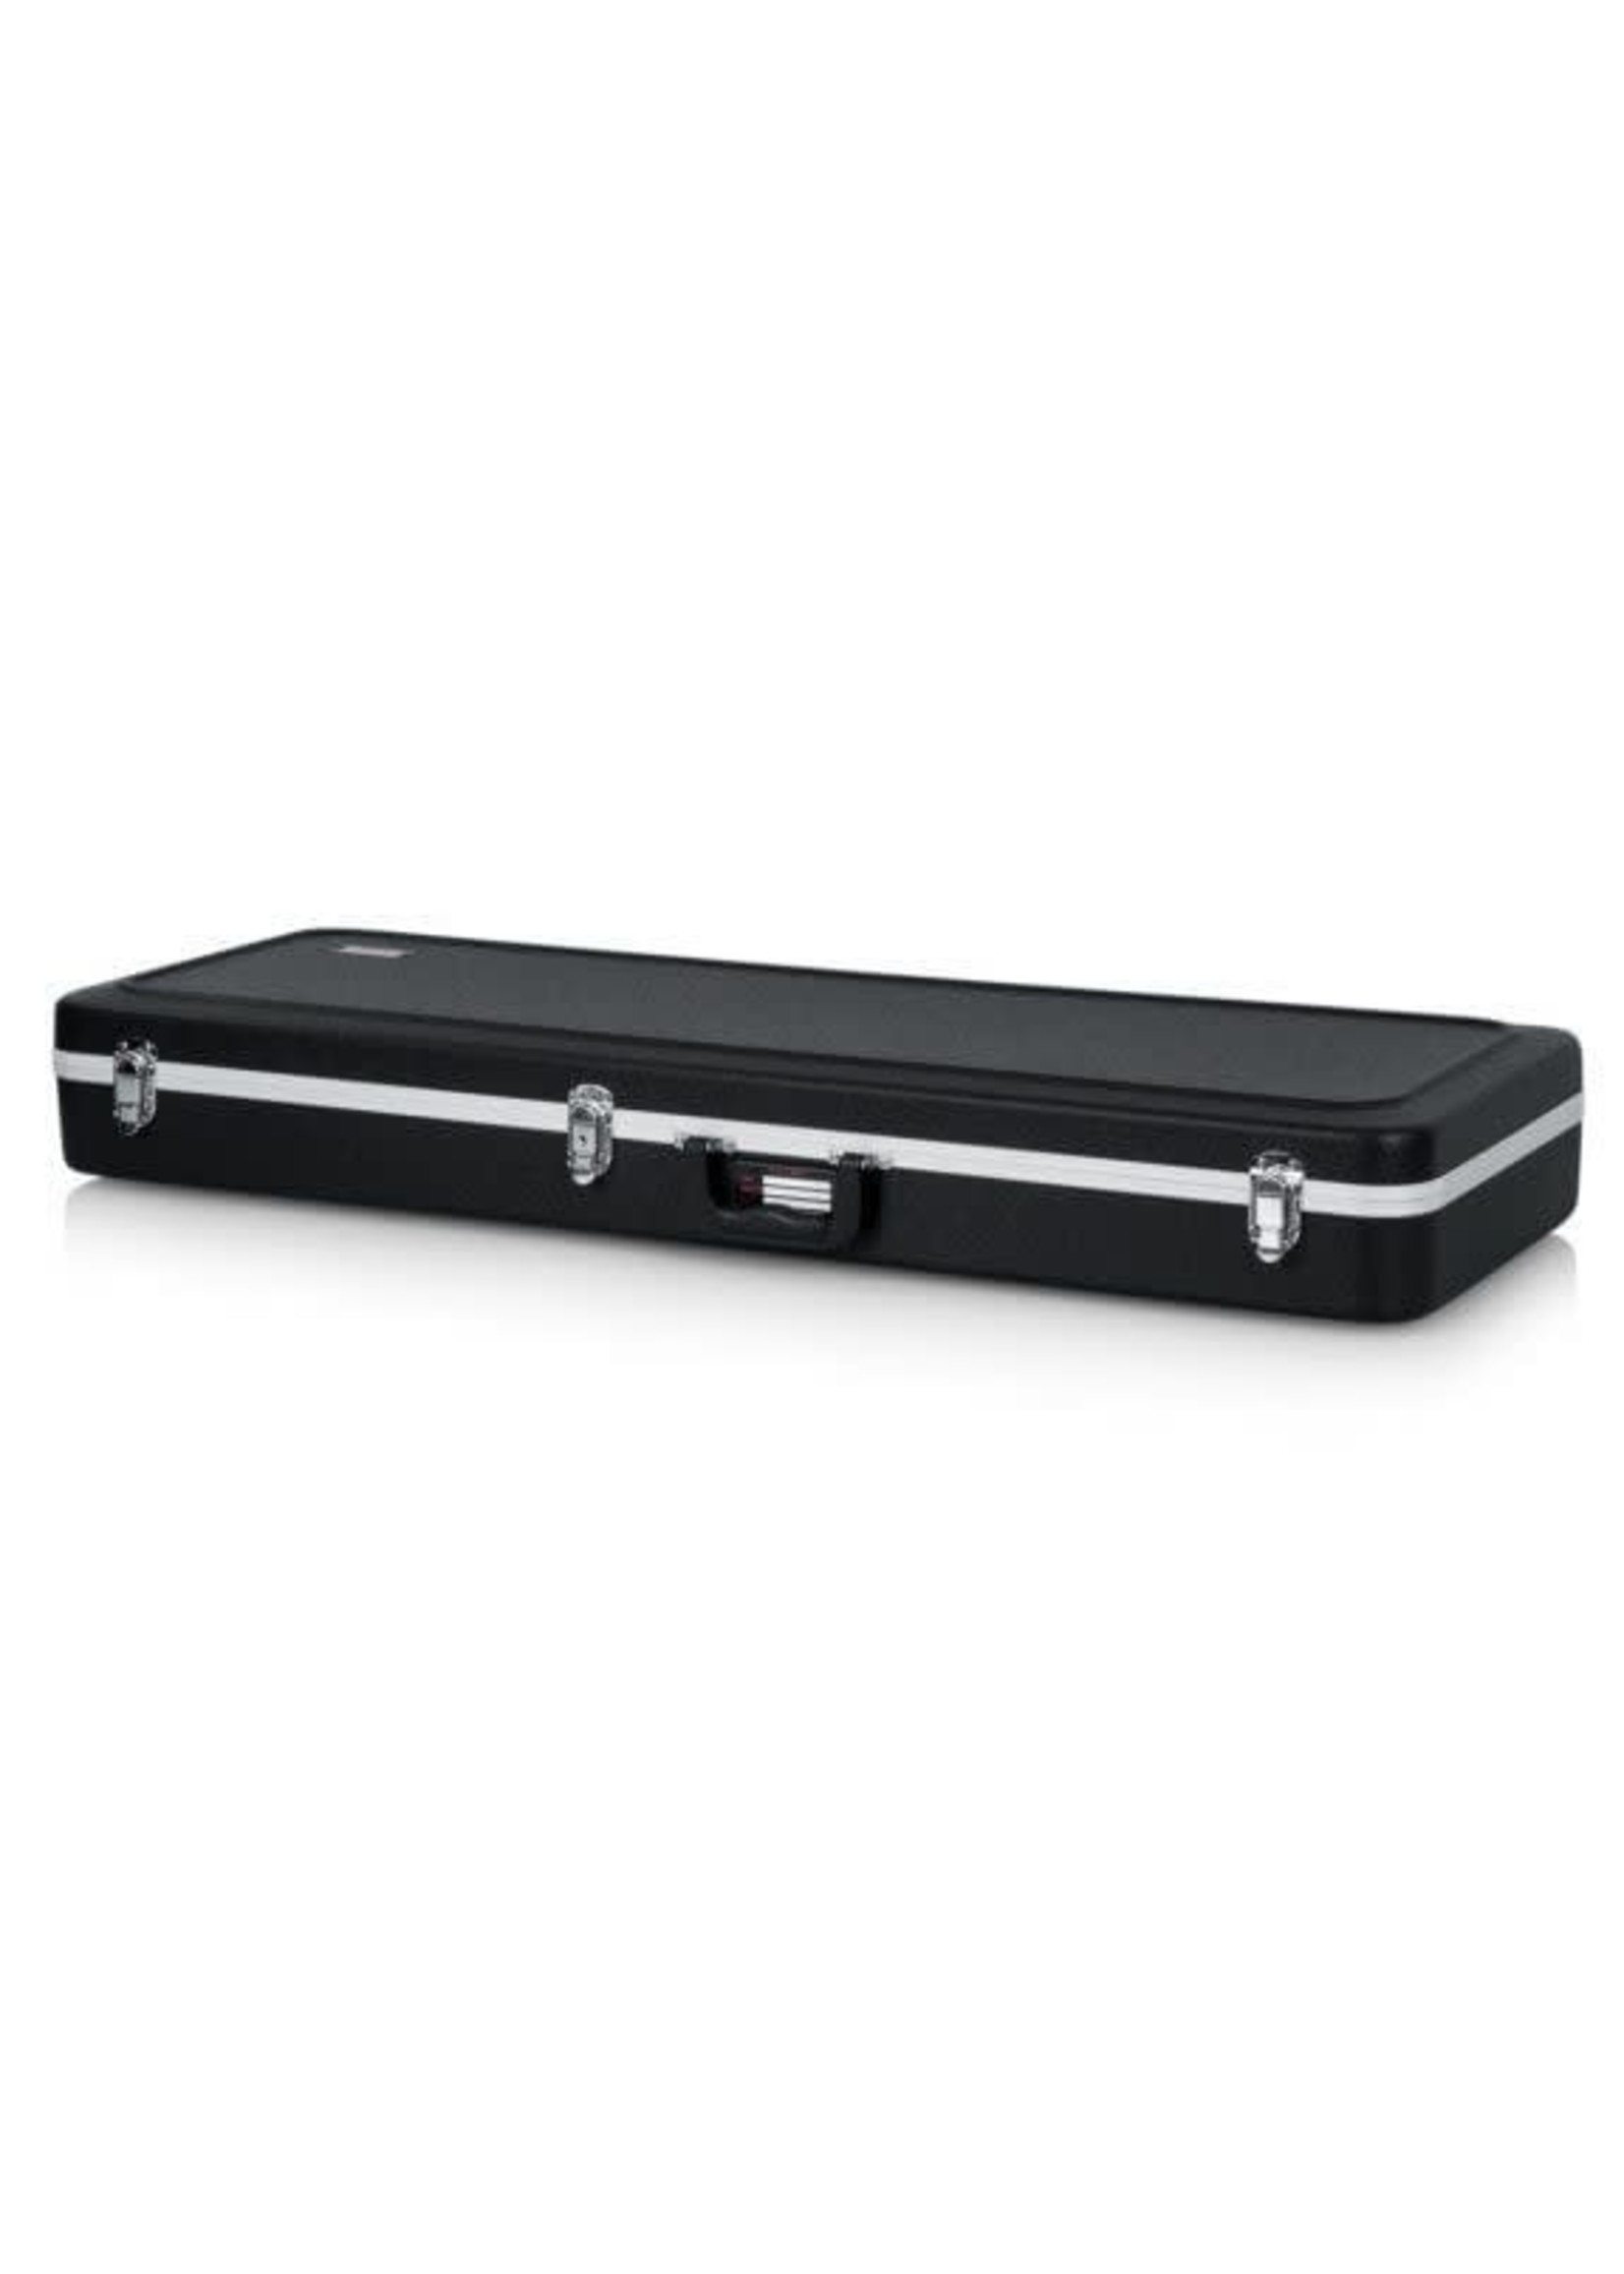 Gator Gator Cases GC-ELECTRIC-A Deluxe Molded Case for Electric Guitars, Black